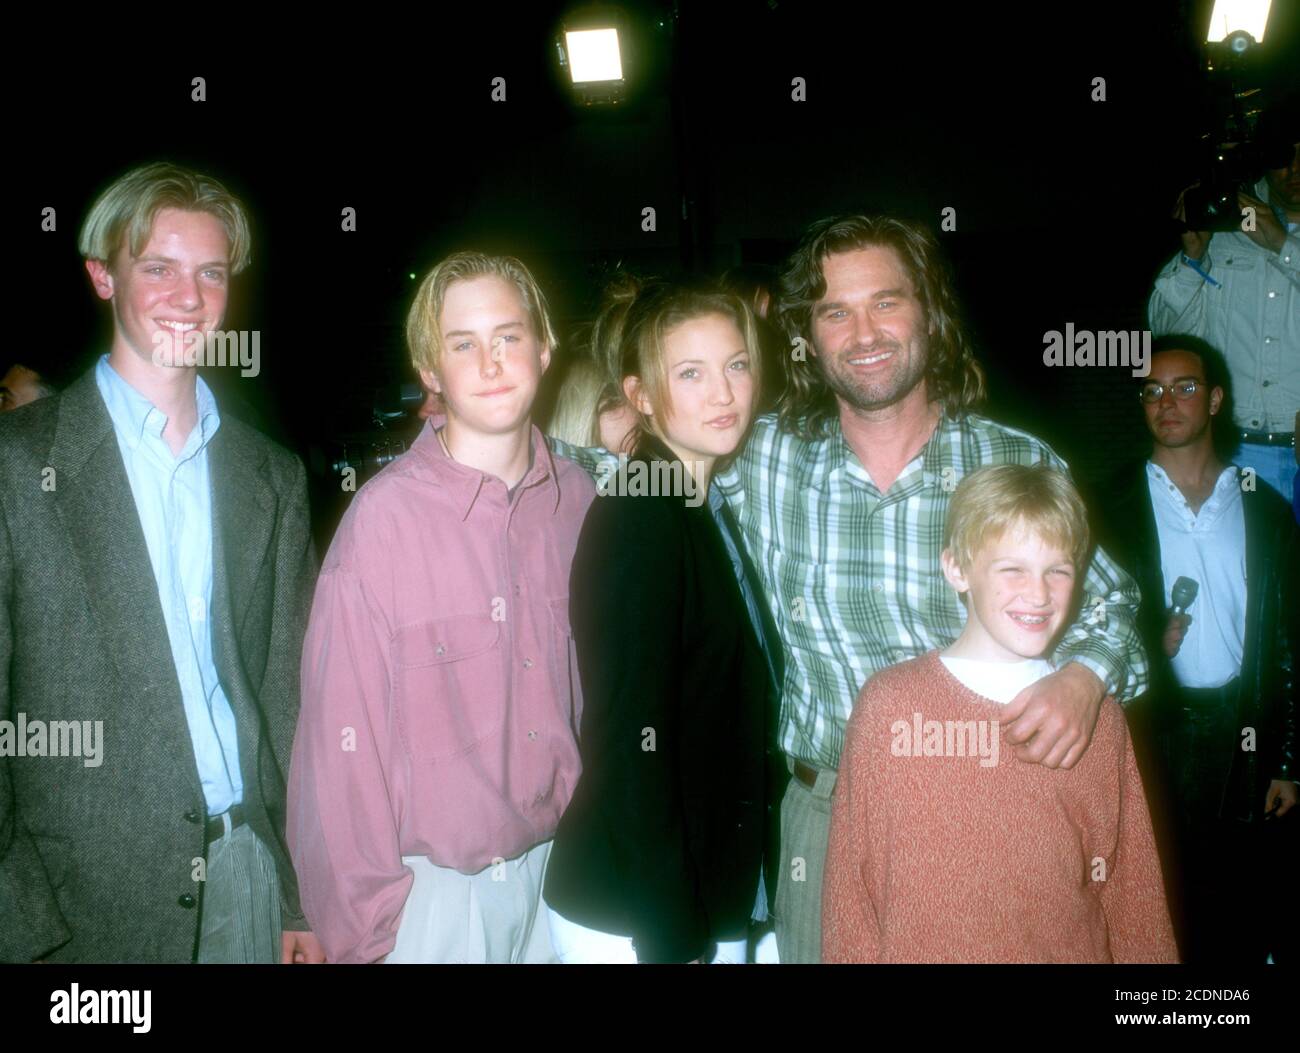 Westwood, California, USA 11th March 1996 (L-R) Guest, Boston Russell, Actress Kate Hudson, actor Kurt Russell and son Wyatt Russell attend Warner Bros. Pictures' 'Executive Decision' Premiere on March 11, 1996 at Mann Village Theatre in Westwood, California, USA. Photo by Barry King/Alamy Stock Photo Stock Photo